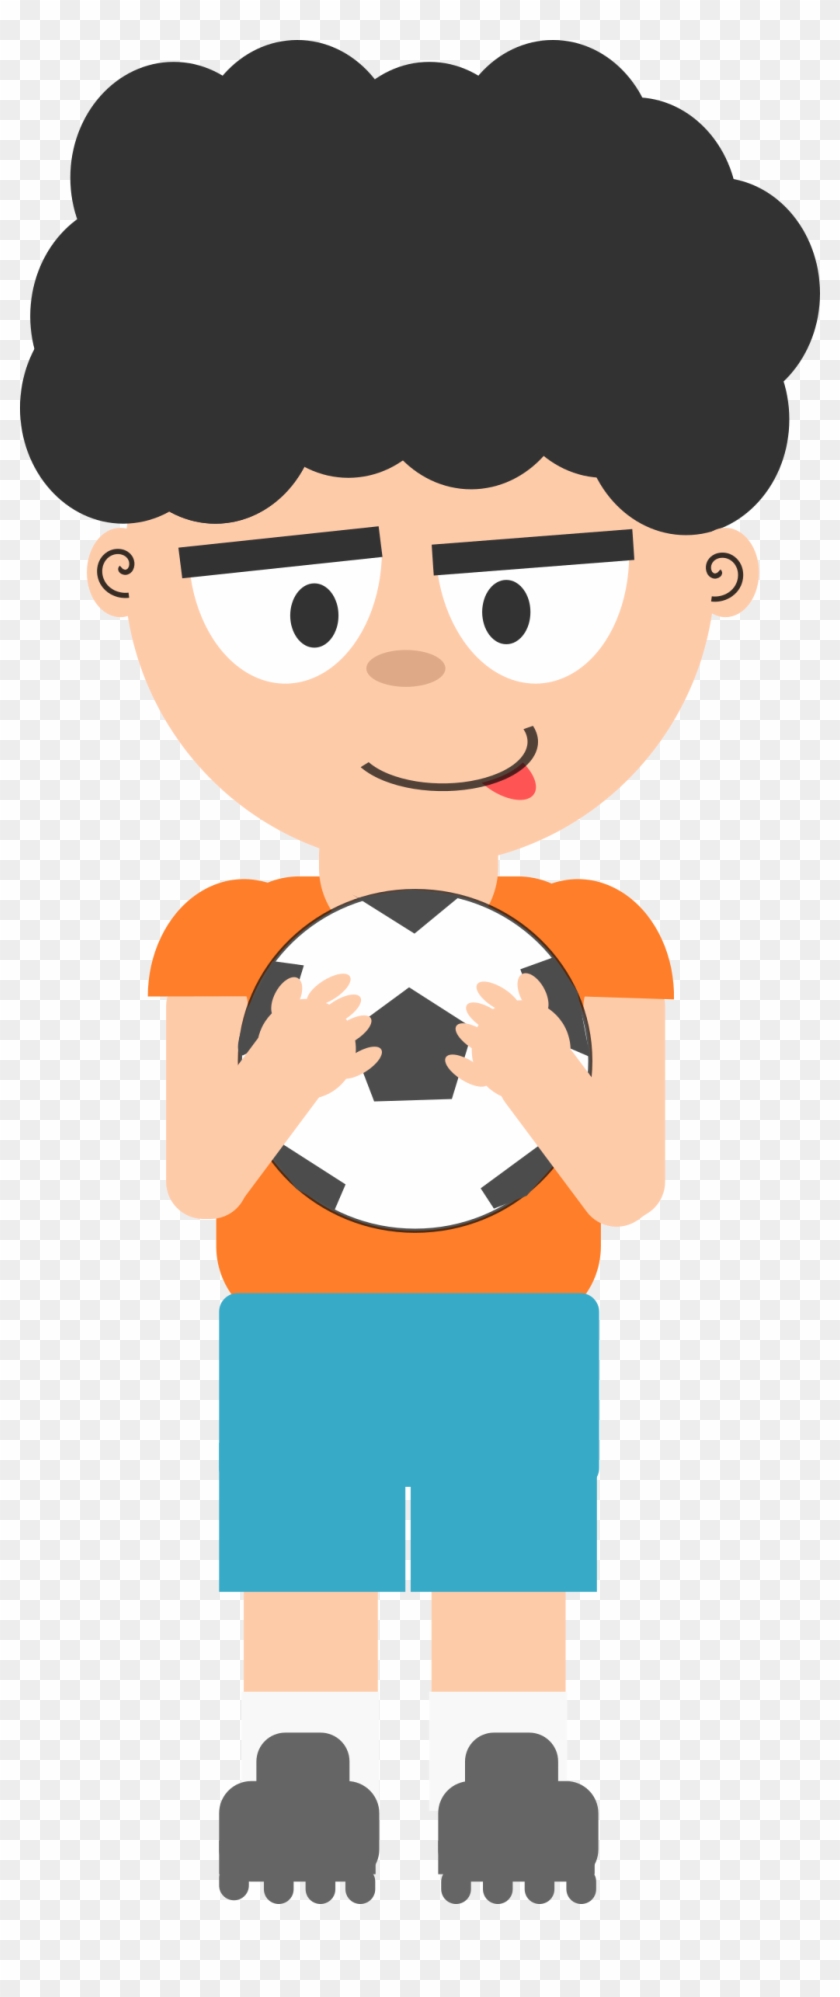 This Free Icons Png Design Of Cartoon Soccer Guy - Cartoon Soccer Boy Png Clipart #2377943